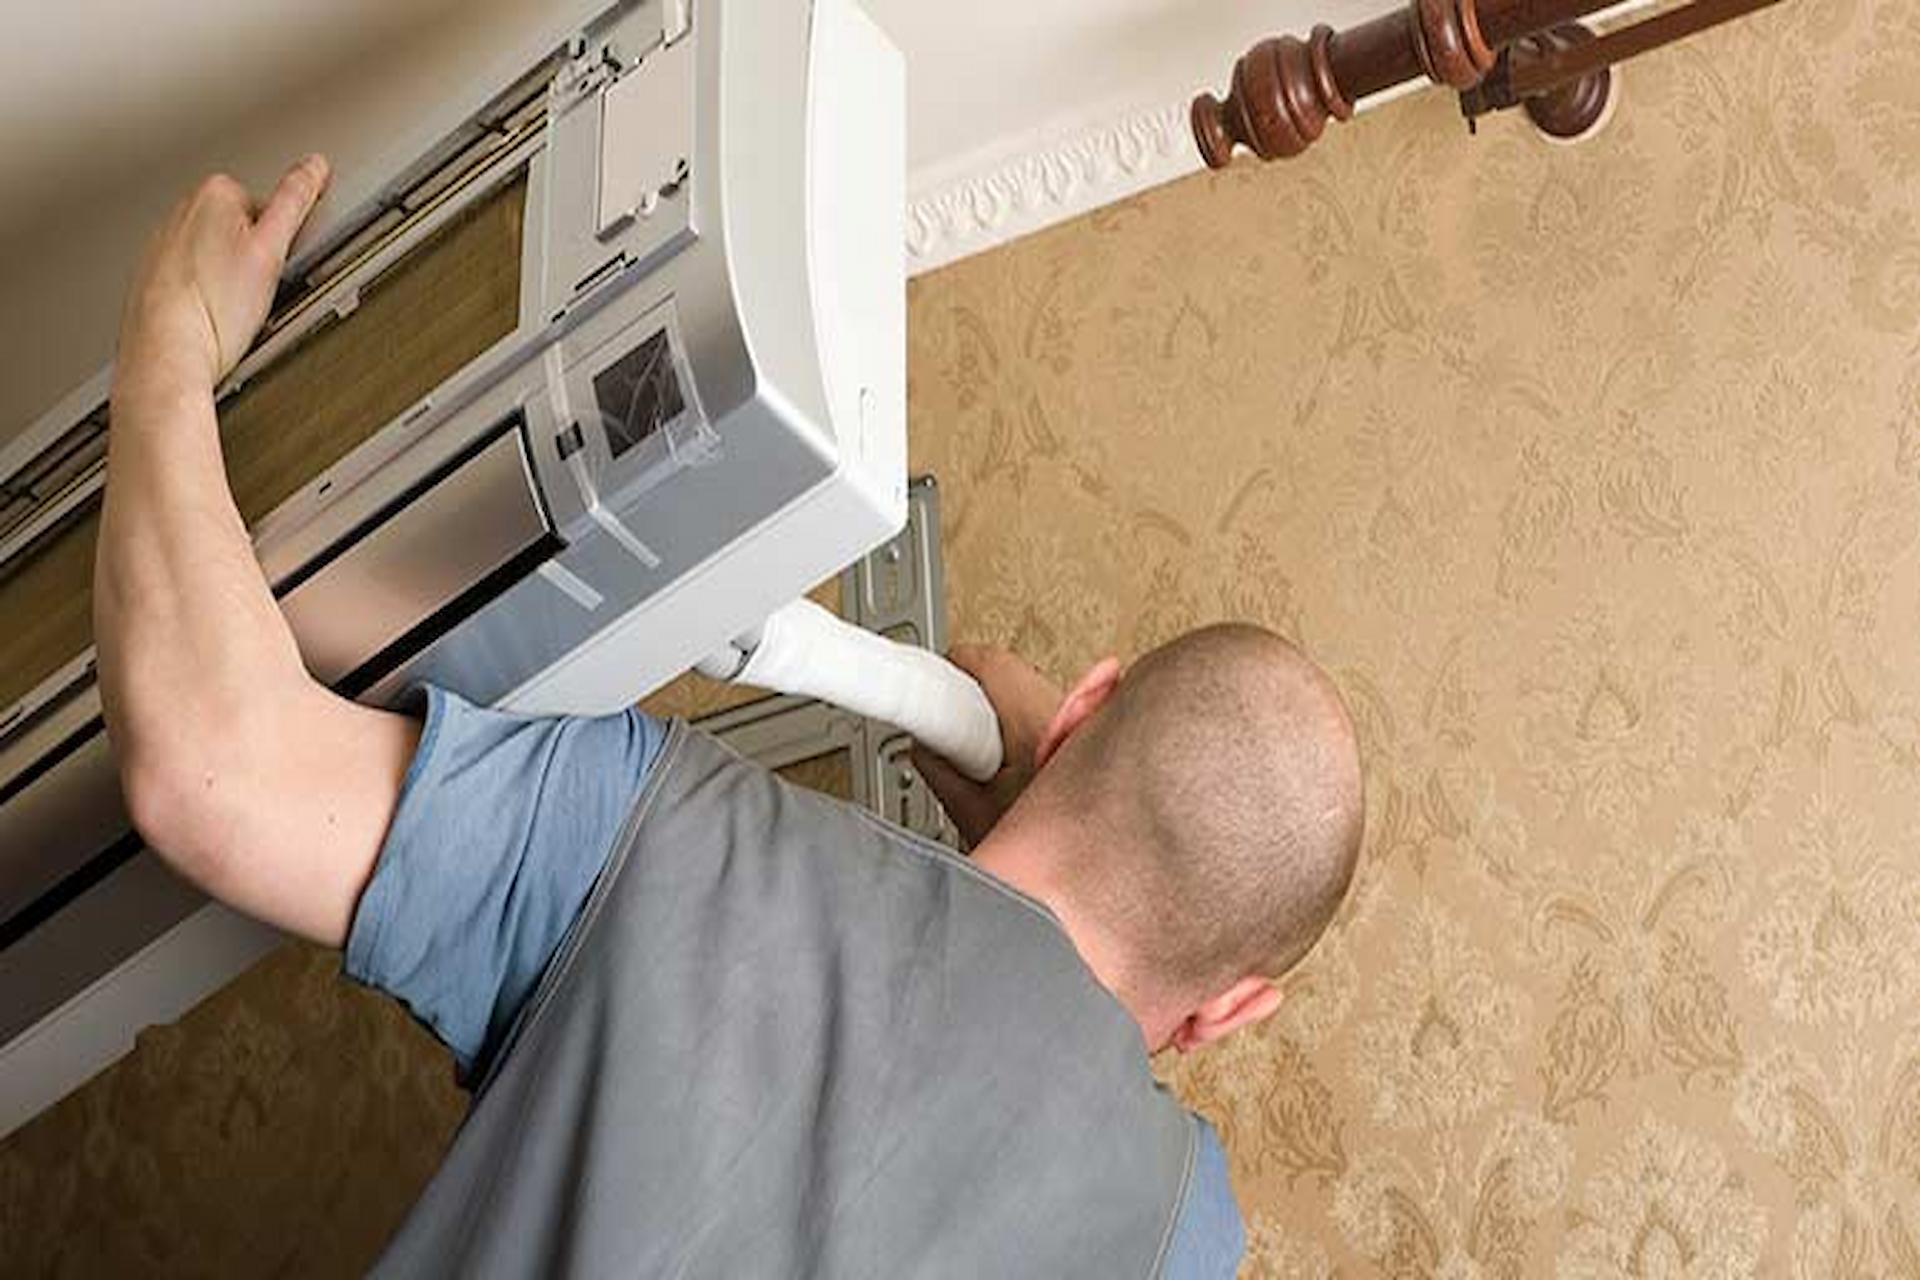 How To Find The Best Air Conditioner Installer In Perth: A Step-By-Step Guide